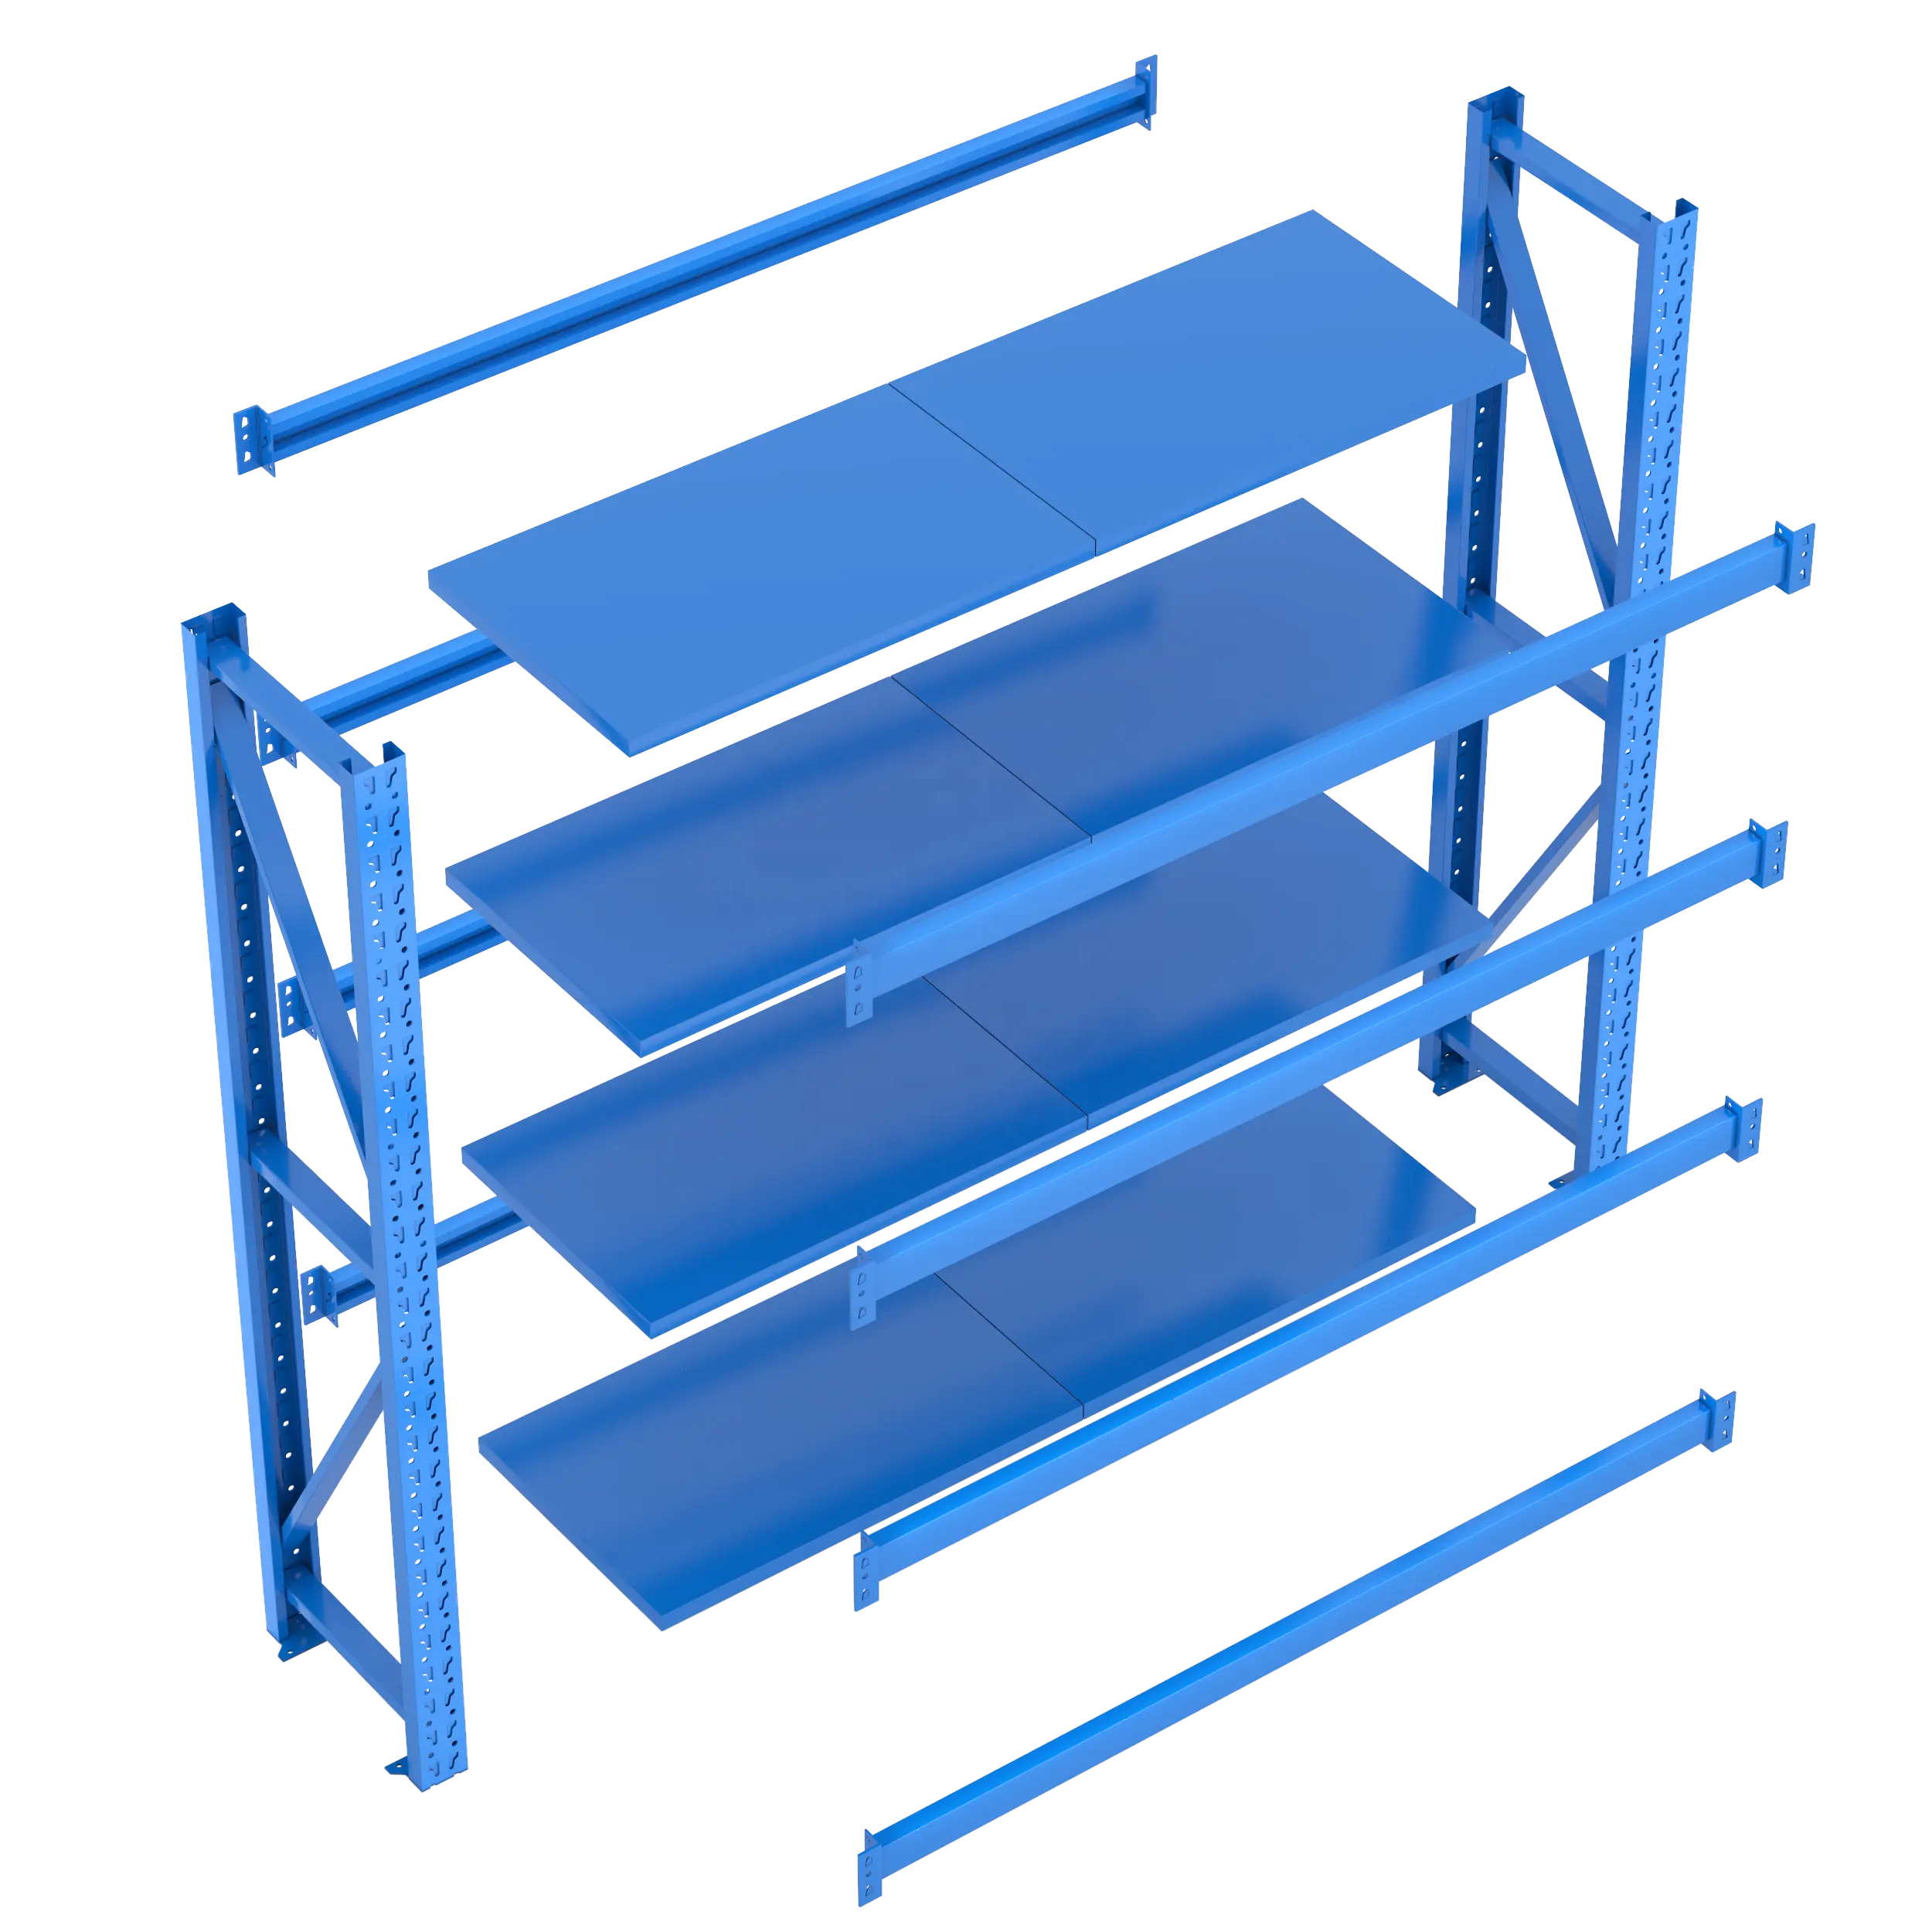 PULAGE Wholesale Heavy-Duty Storage Racks Supermarket Shelves Display Units for Warehouse and Industrial Goods Shelving